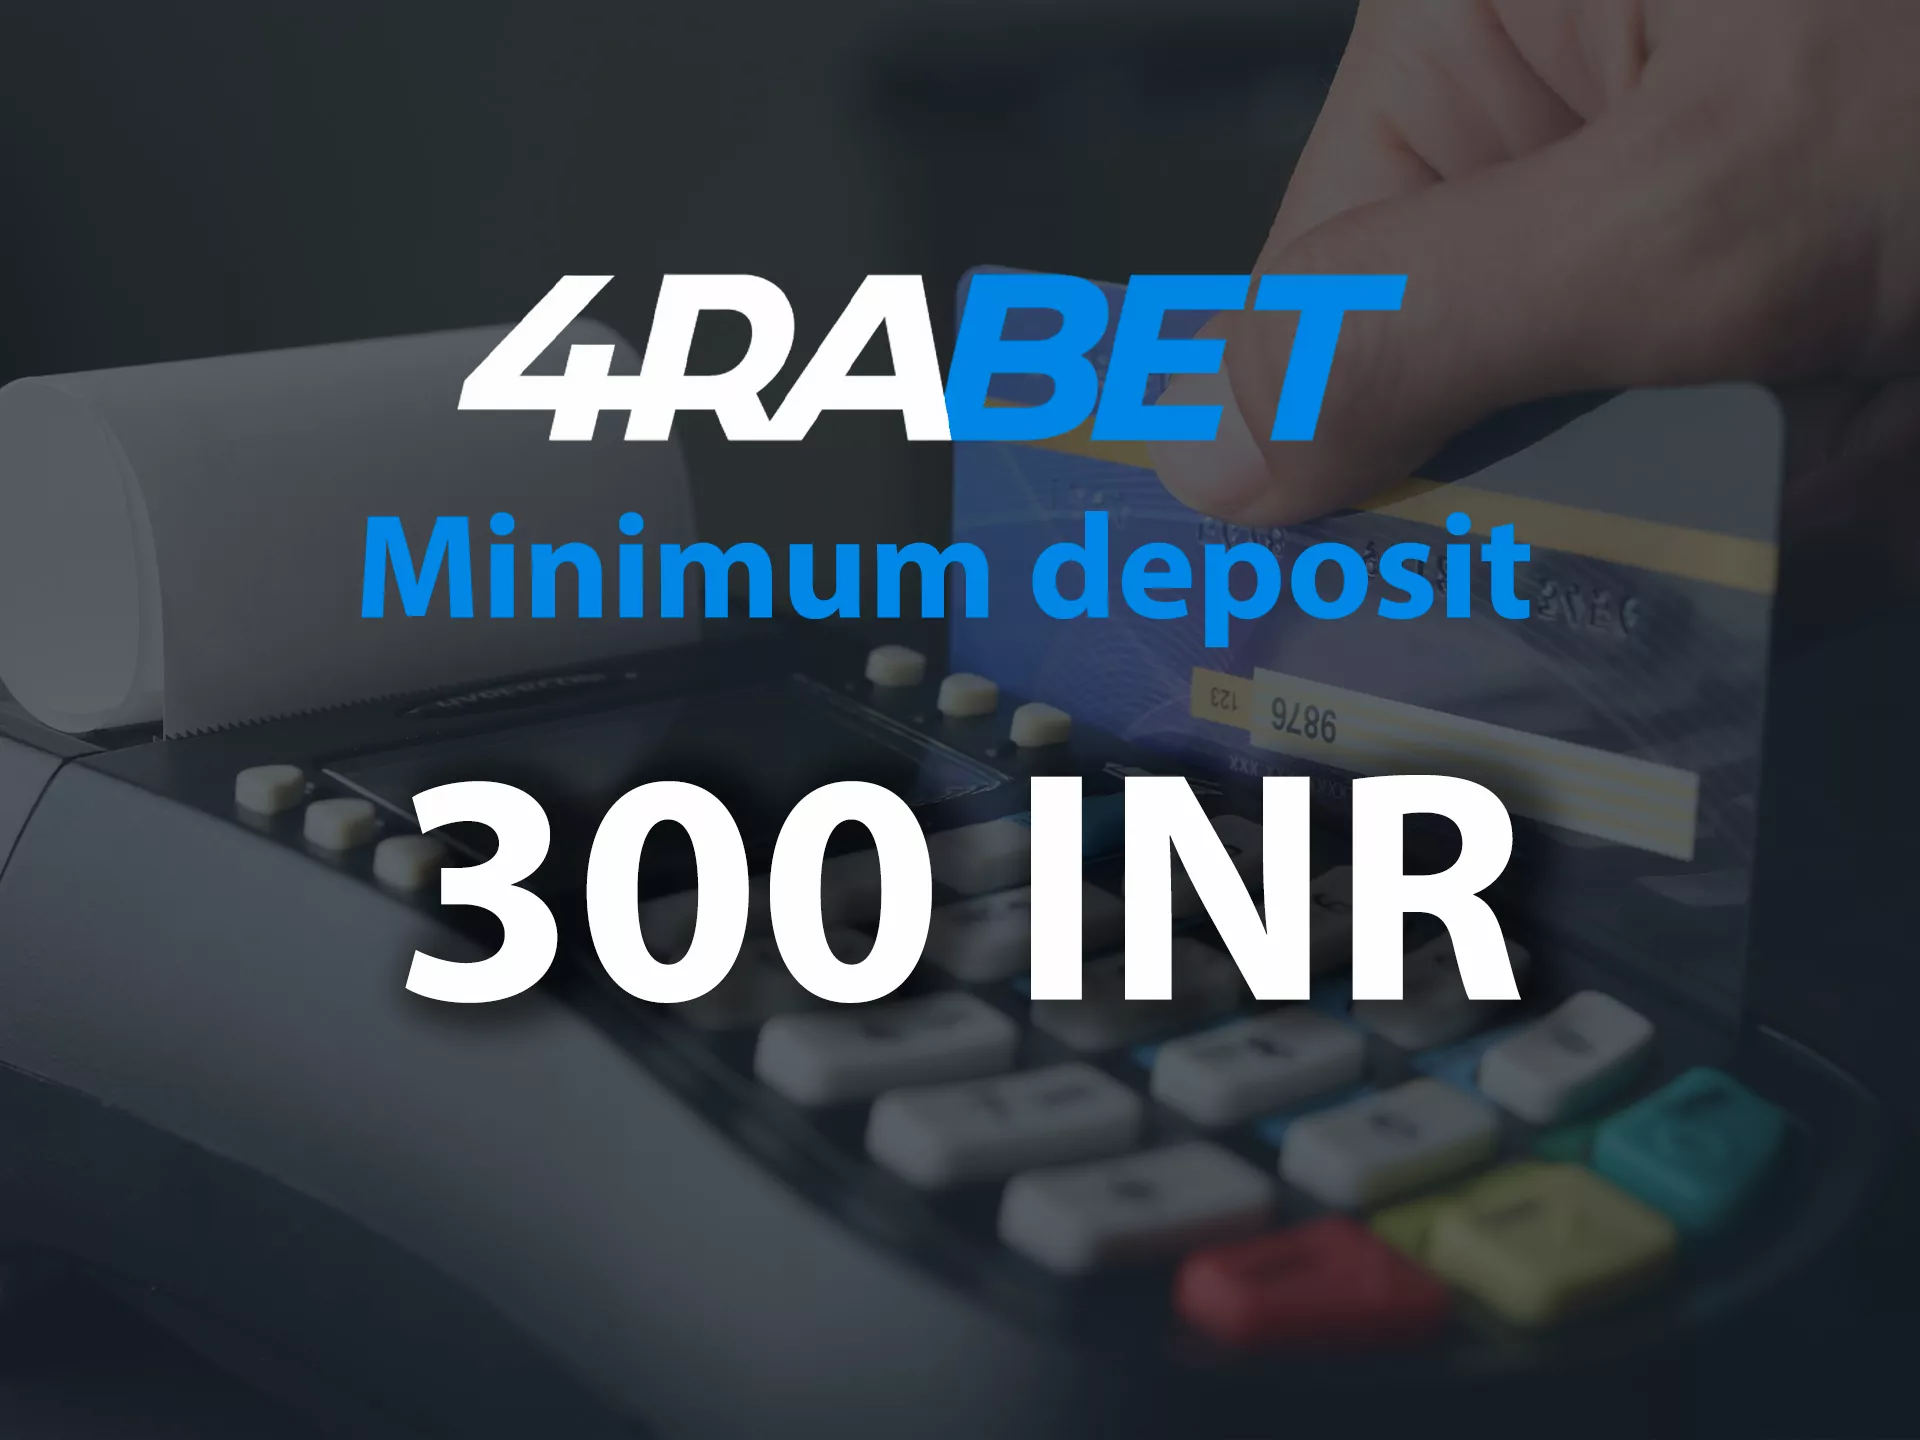 You should deposit at least 300 INR to get the welcome bonus.